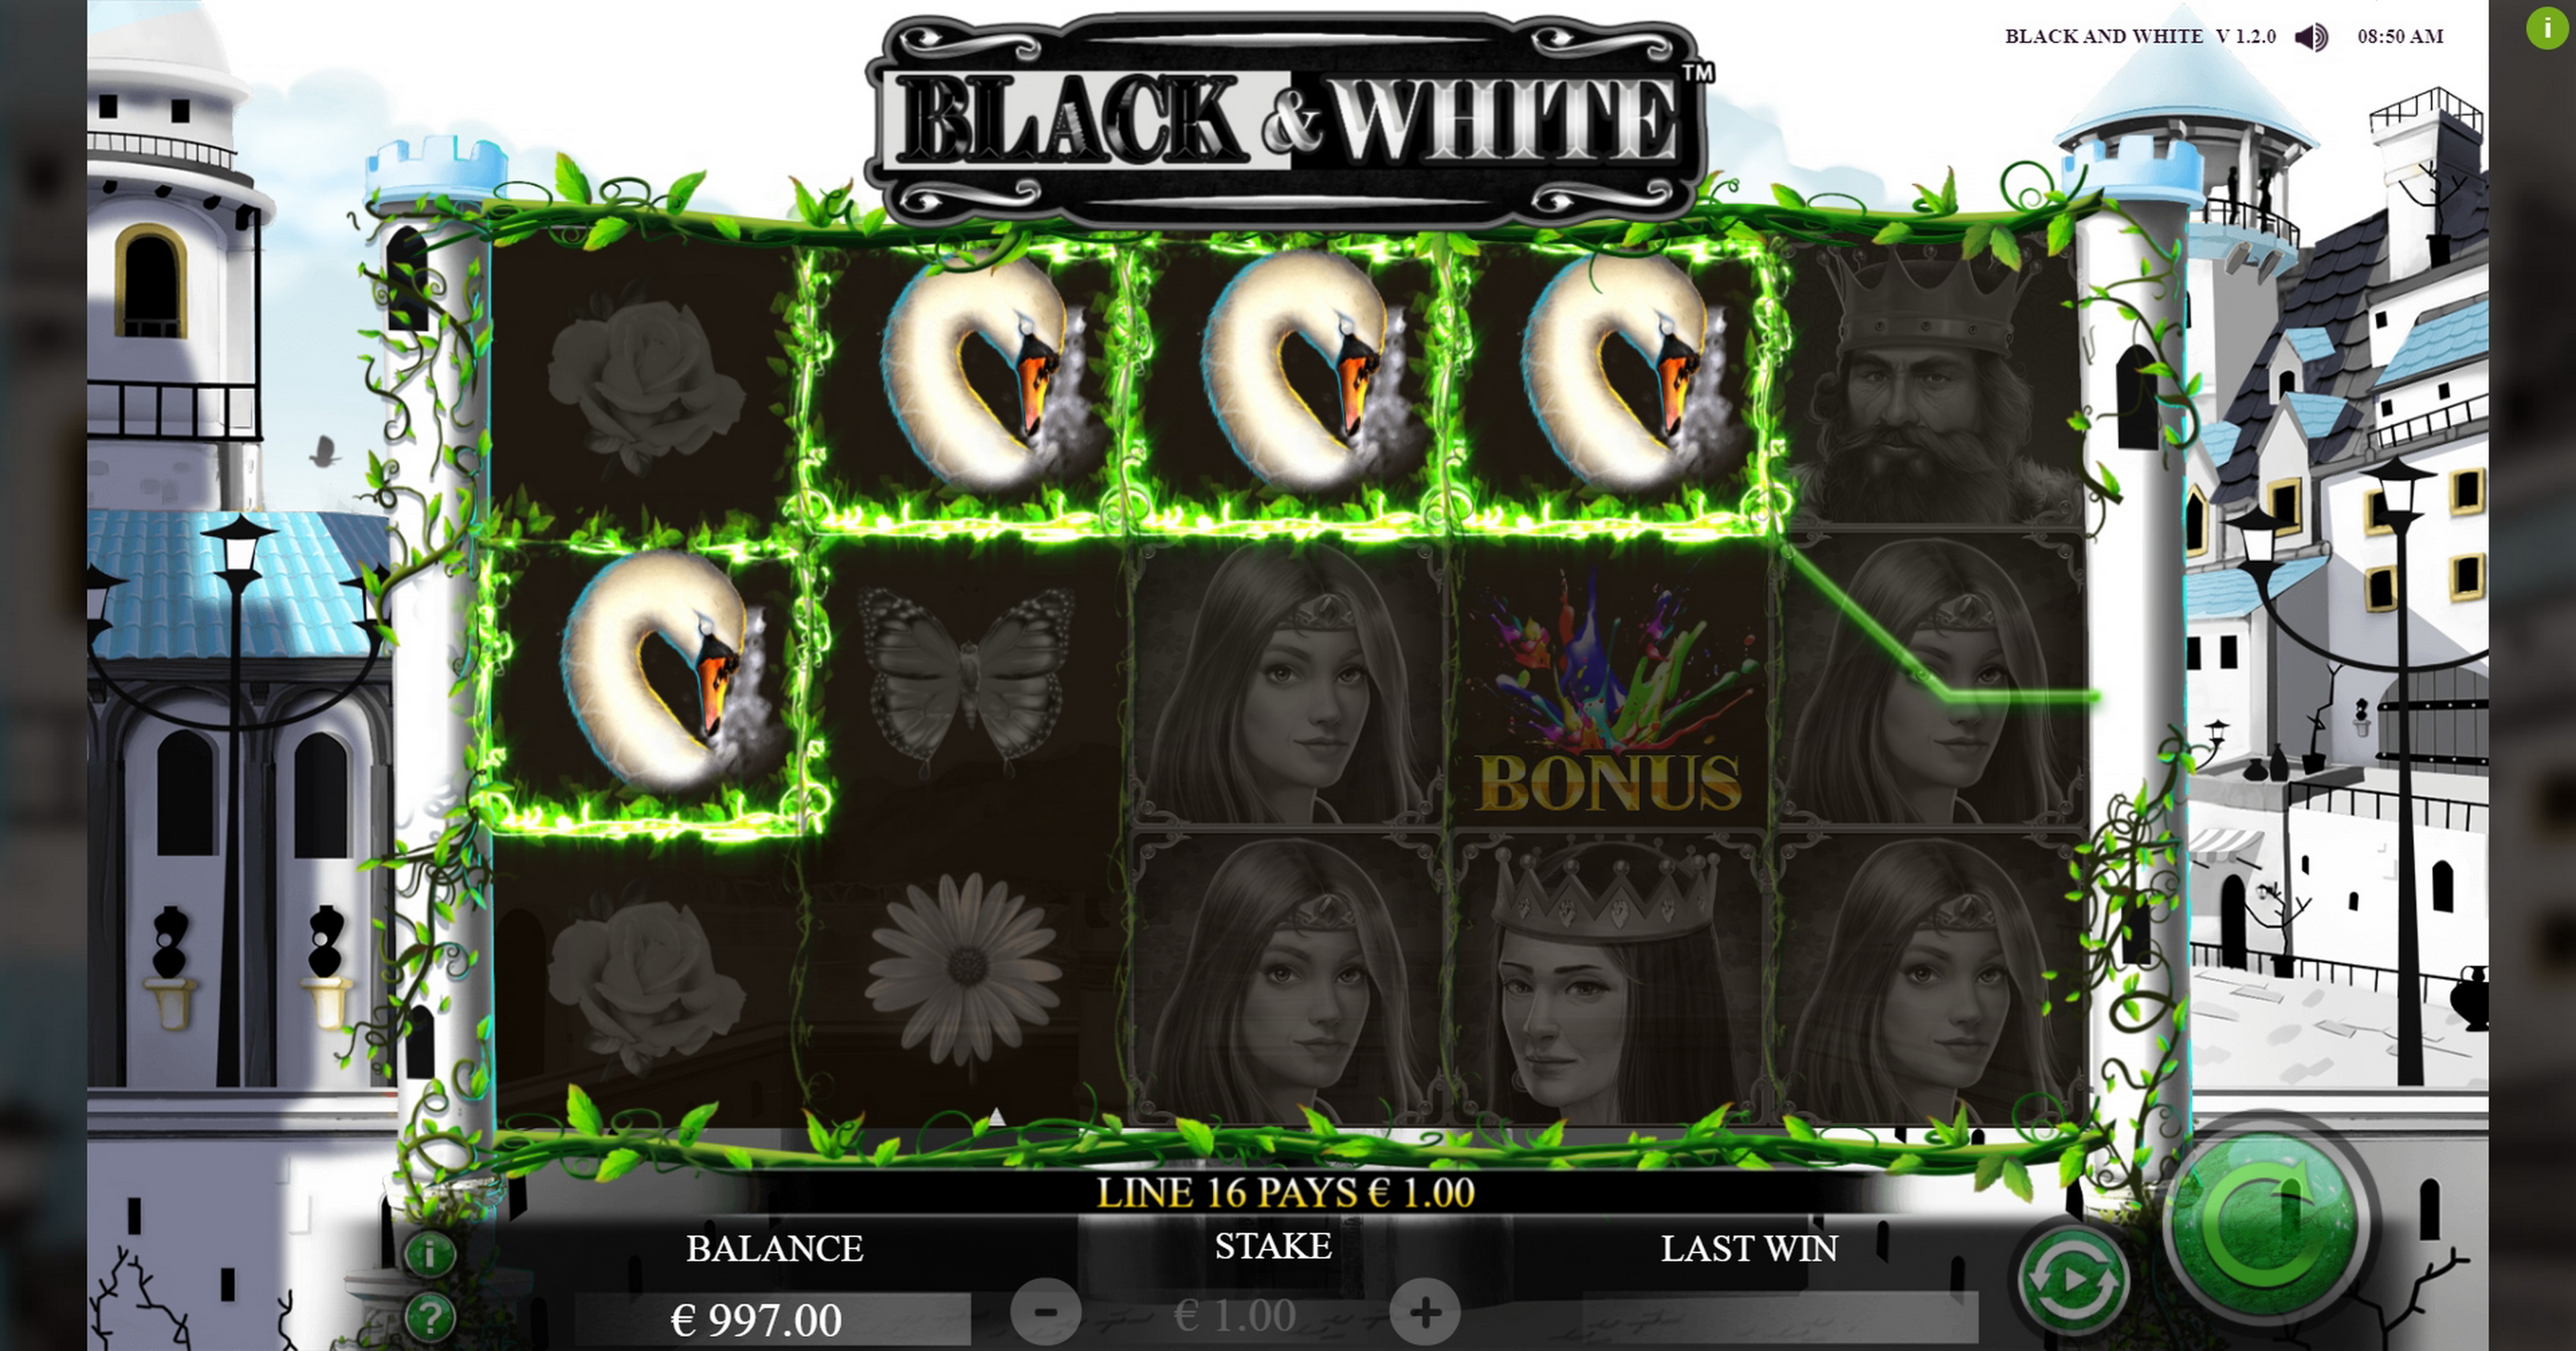 Win Money in Black and White Free Slot Game by Jade Rabbit Gaming